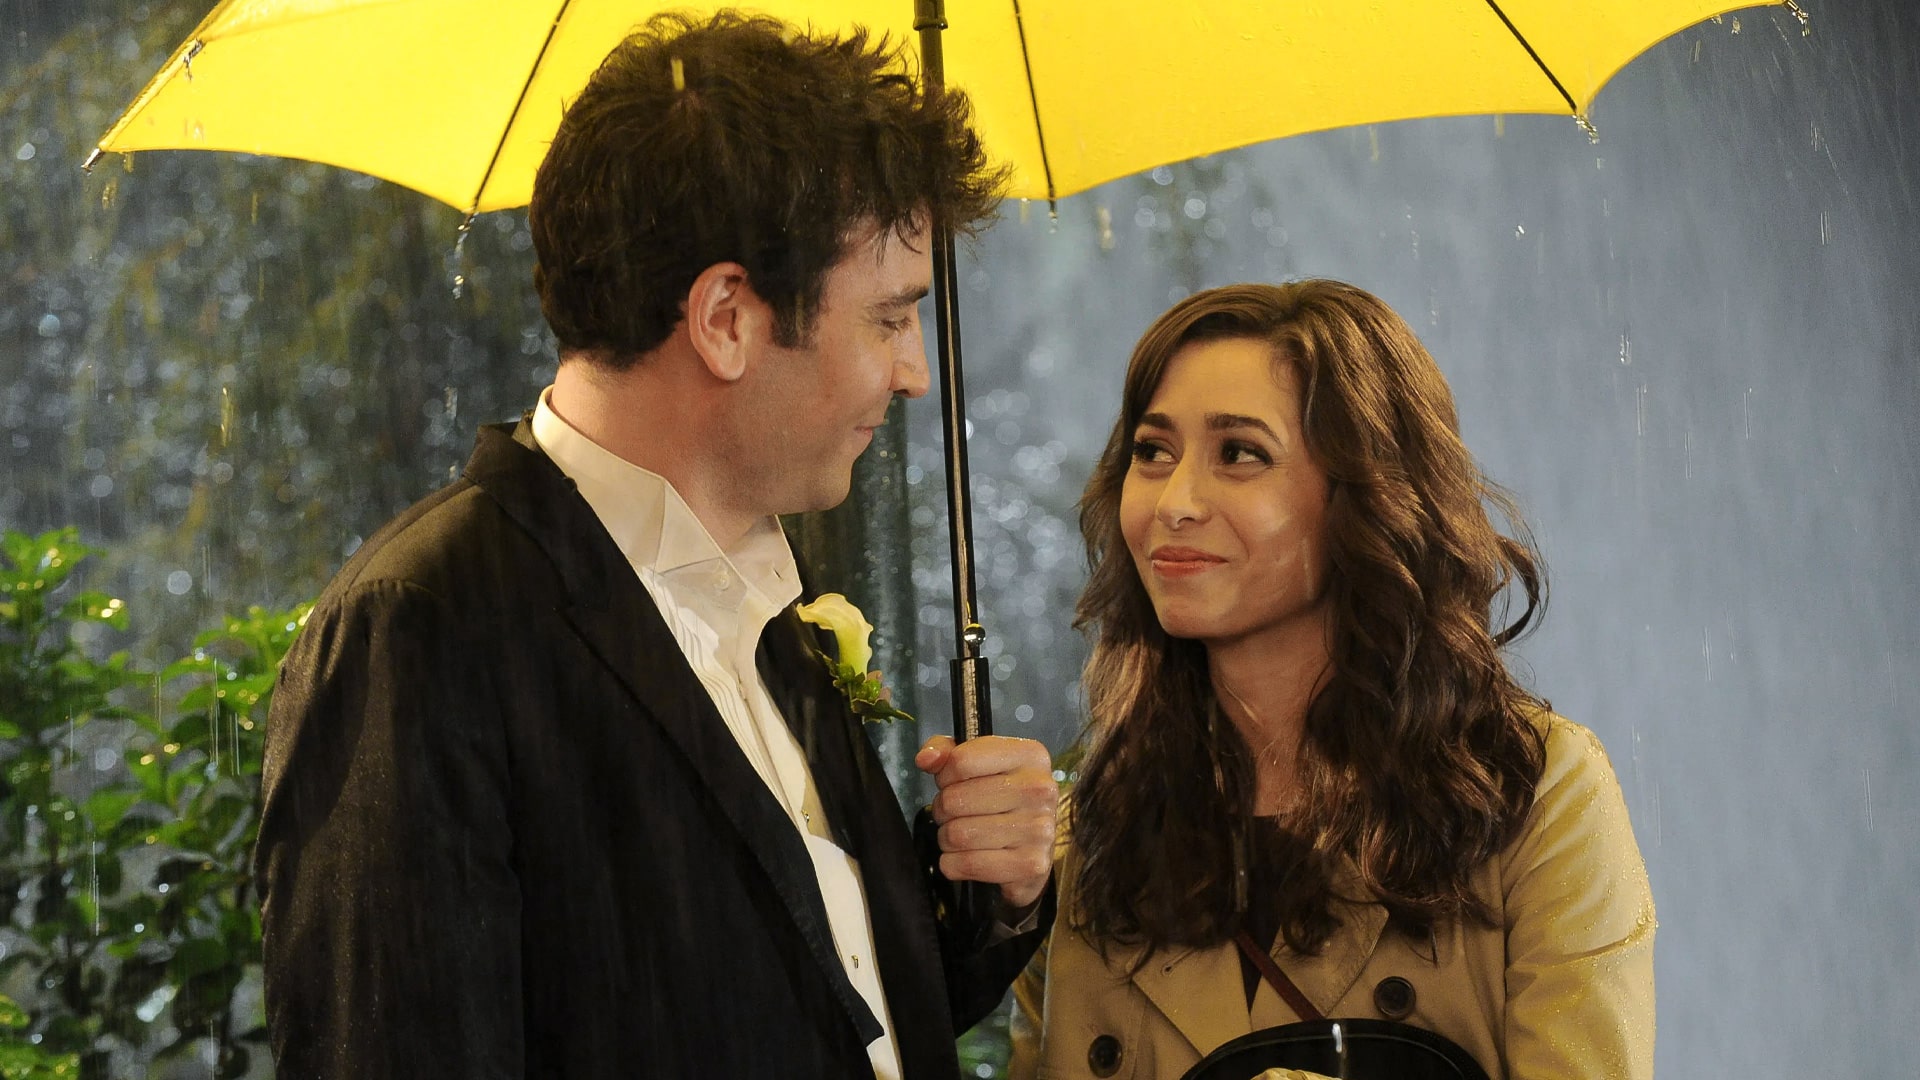 How I Met Your Mother Facts - 35 How I Met Your Mother Facts You Haven't Read Before